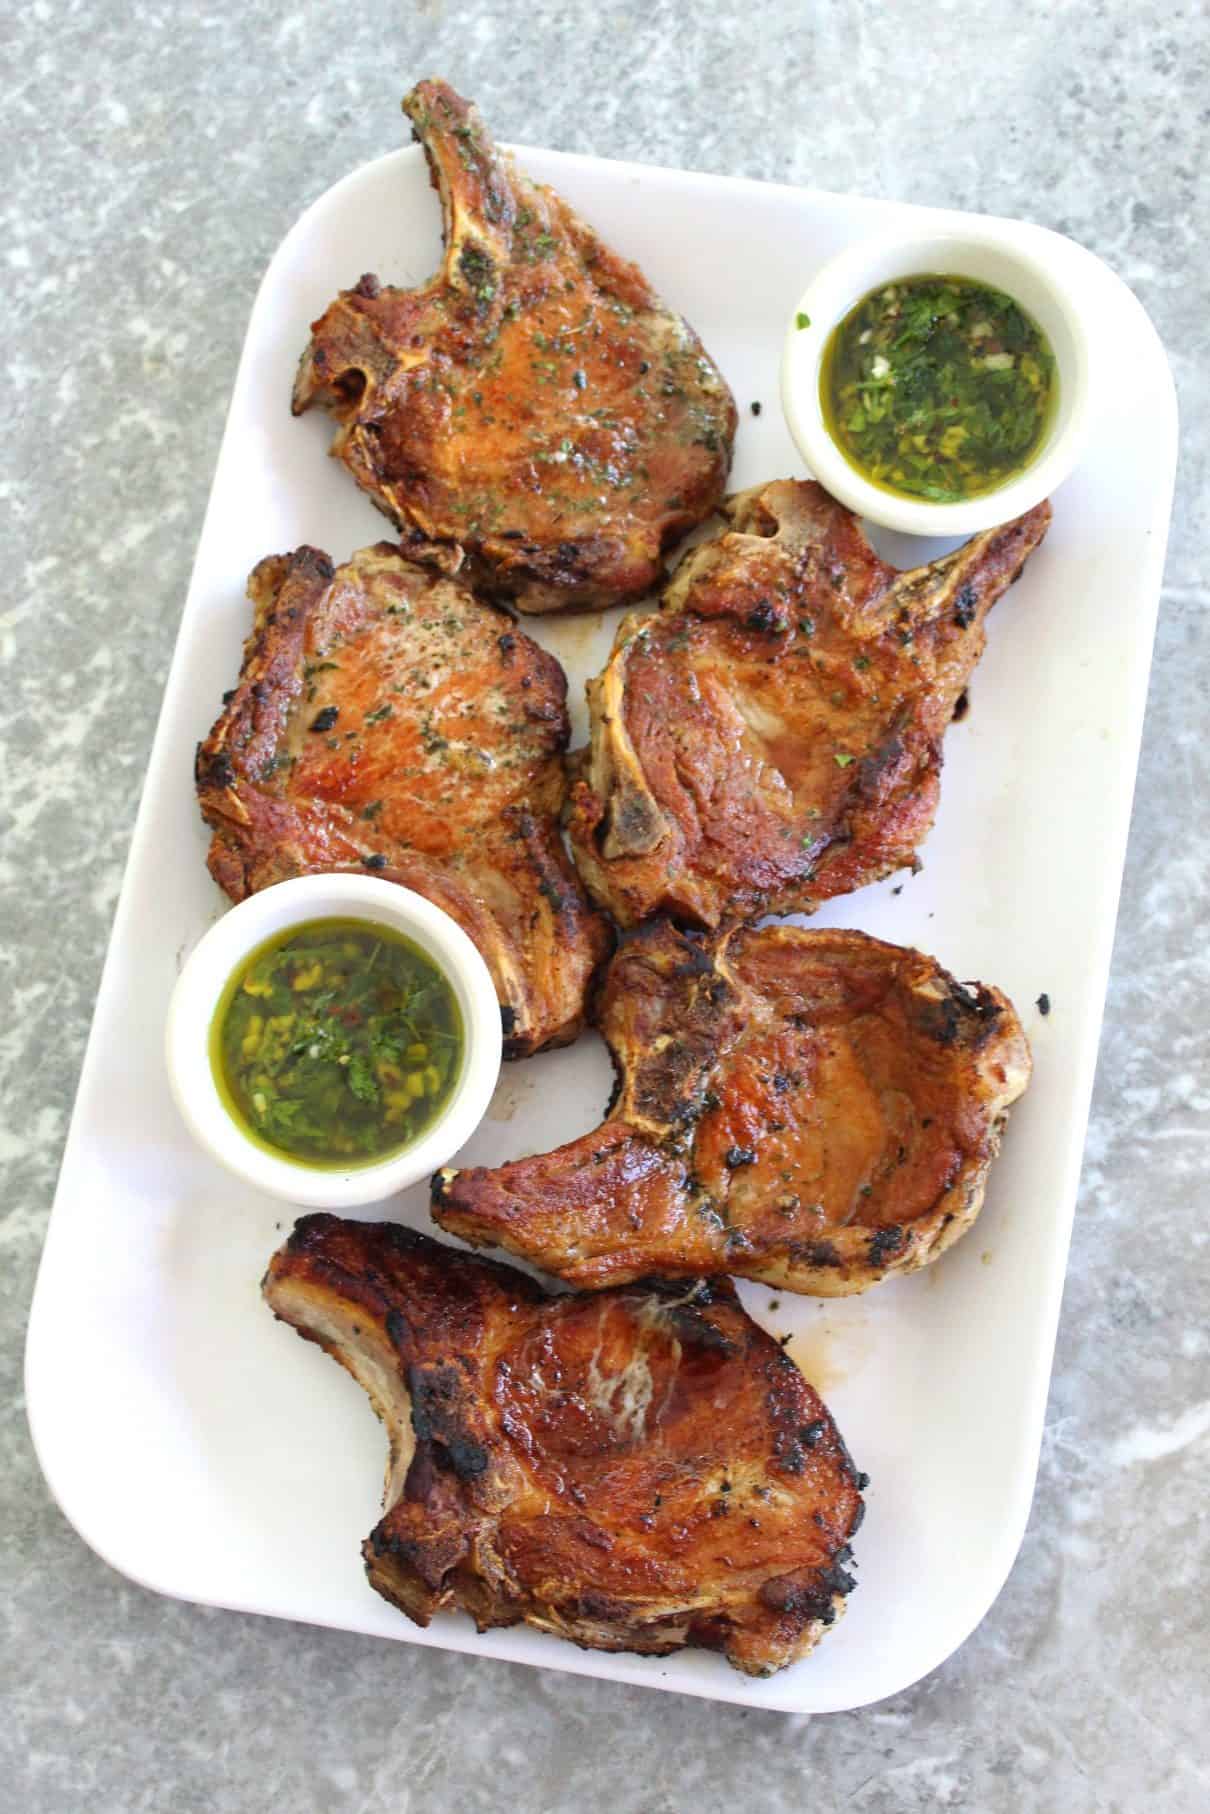 A platter with 5 golden brown, juicy pork chops served with an oily herbed sauce (mint chimichurri).